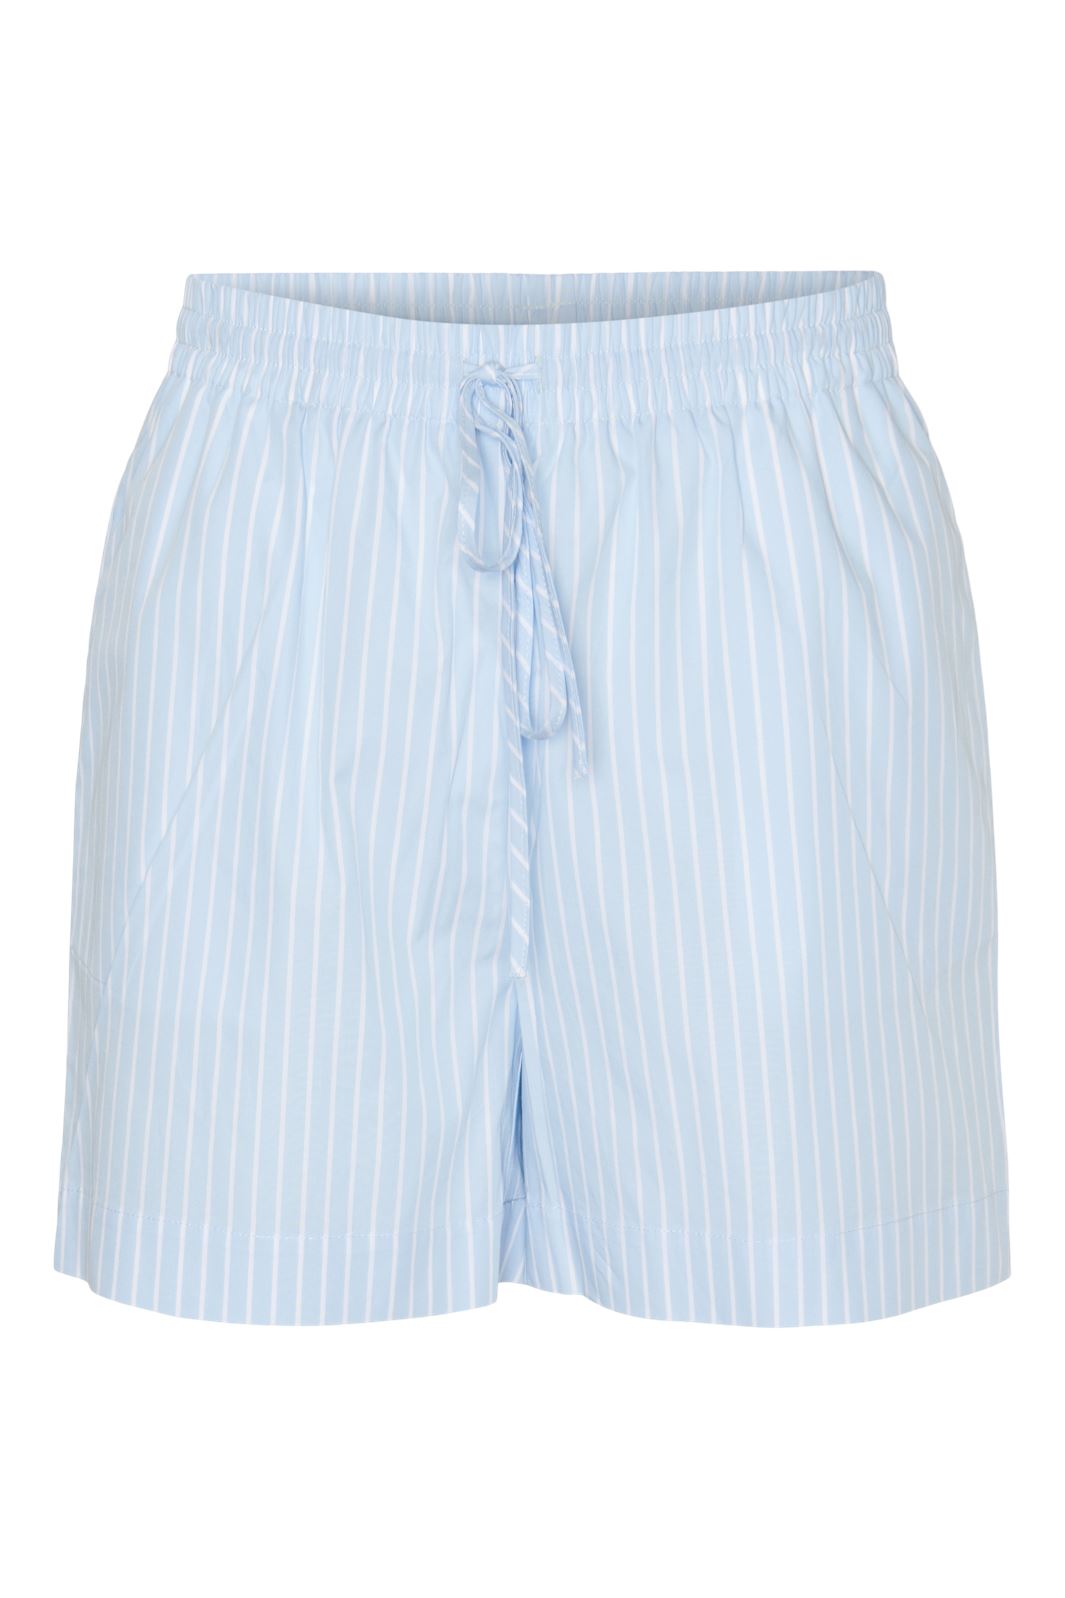 Pieces - Pcpenny Shorts Camp Mm - 4586944 Airy Blue Bright White